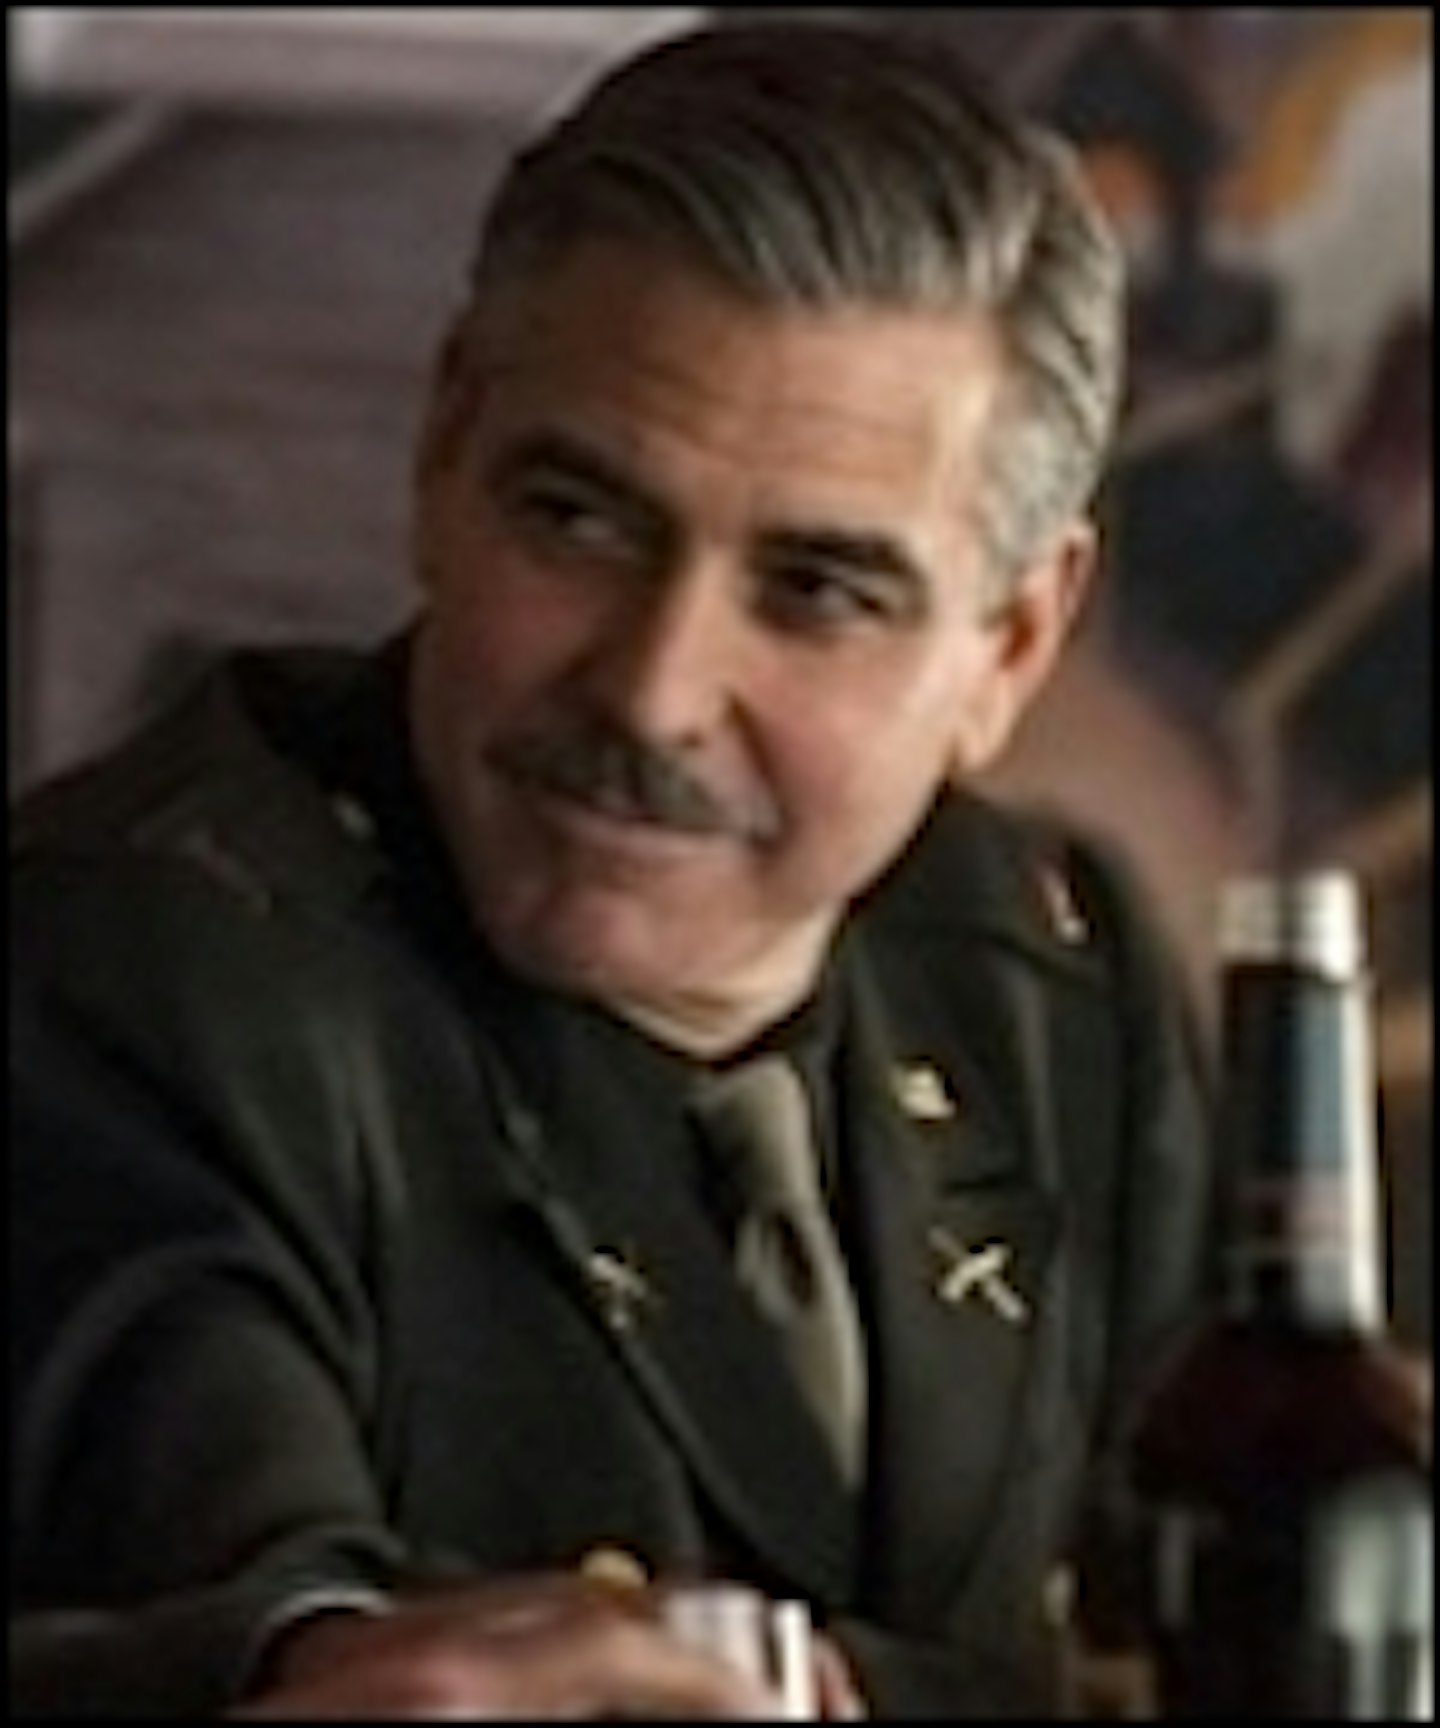 New Trailer For The Monuments Men